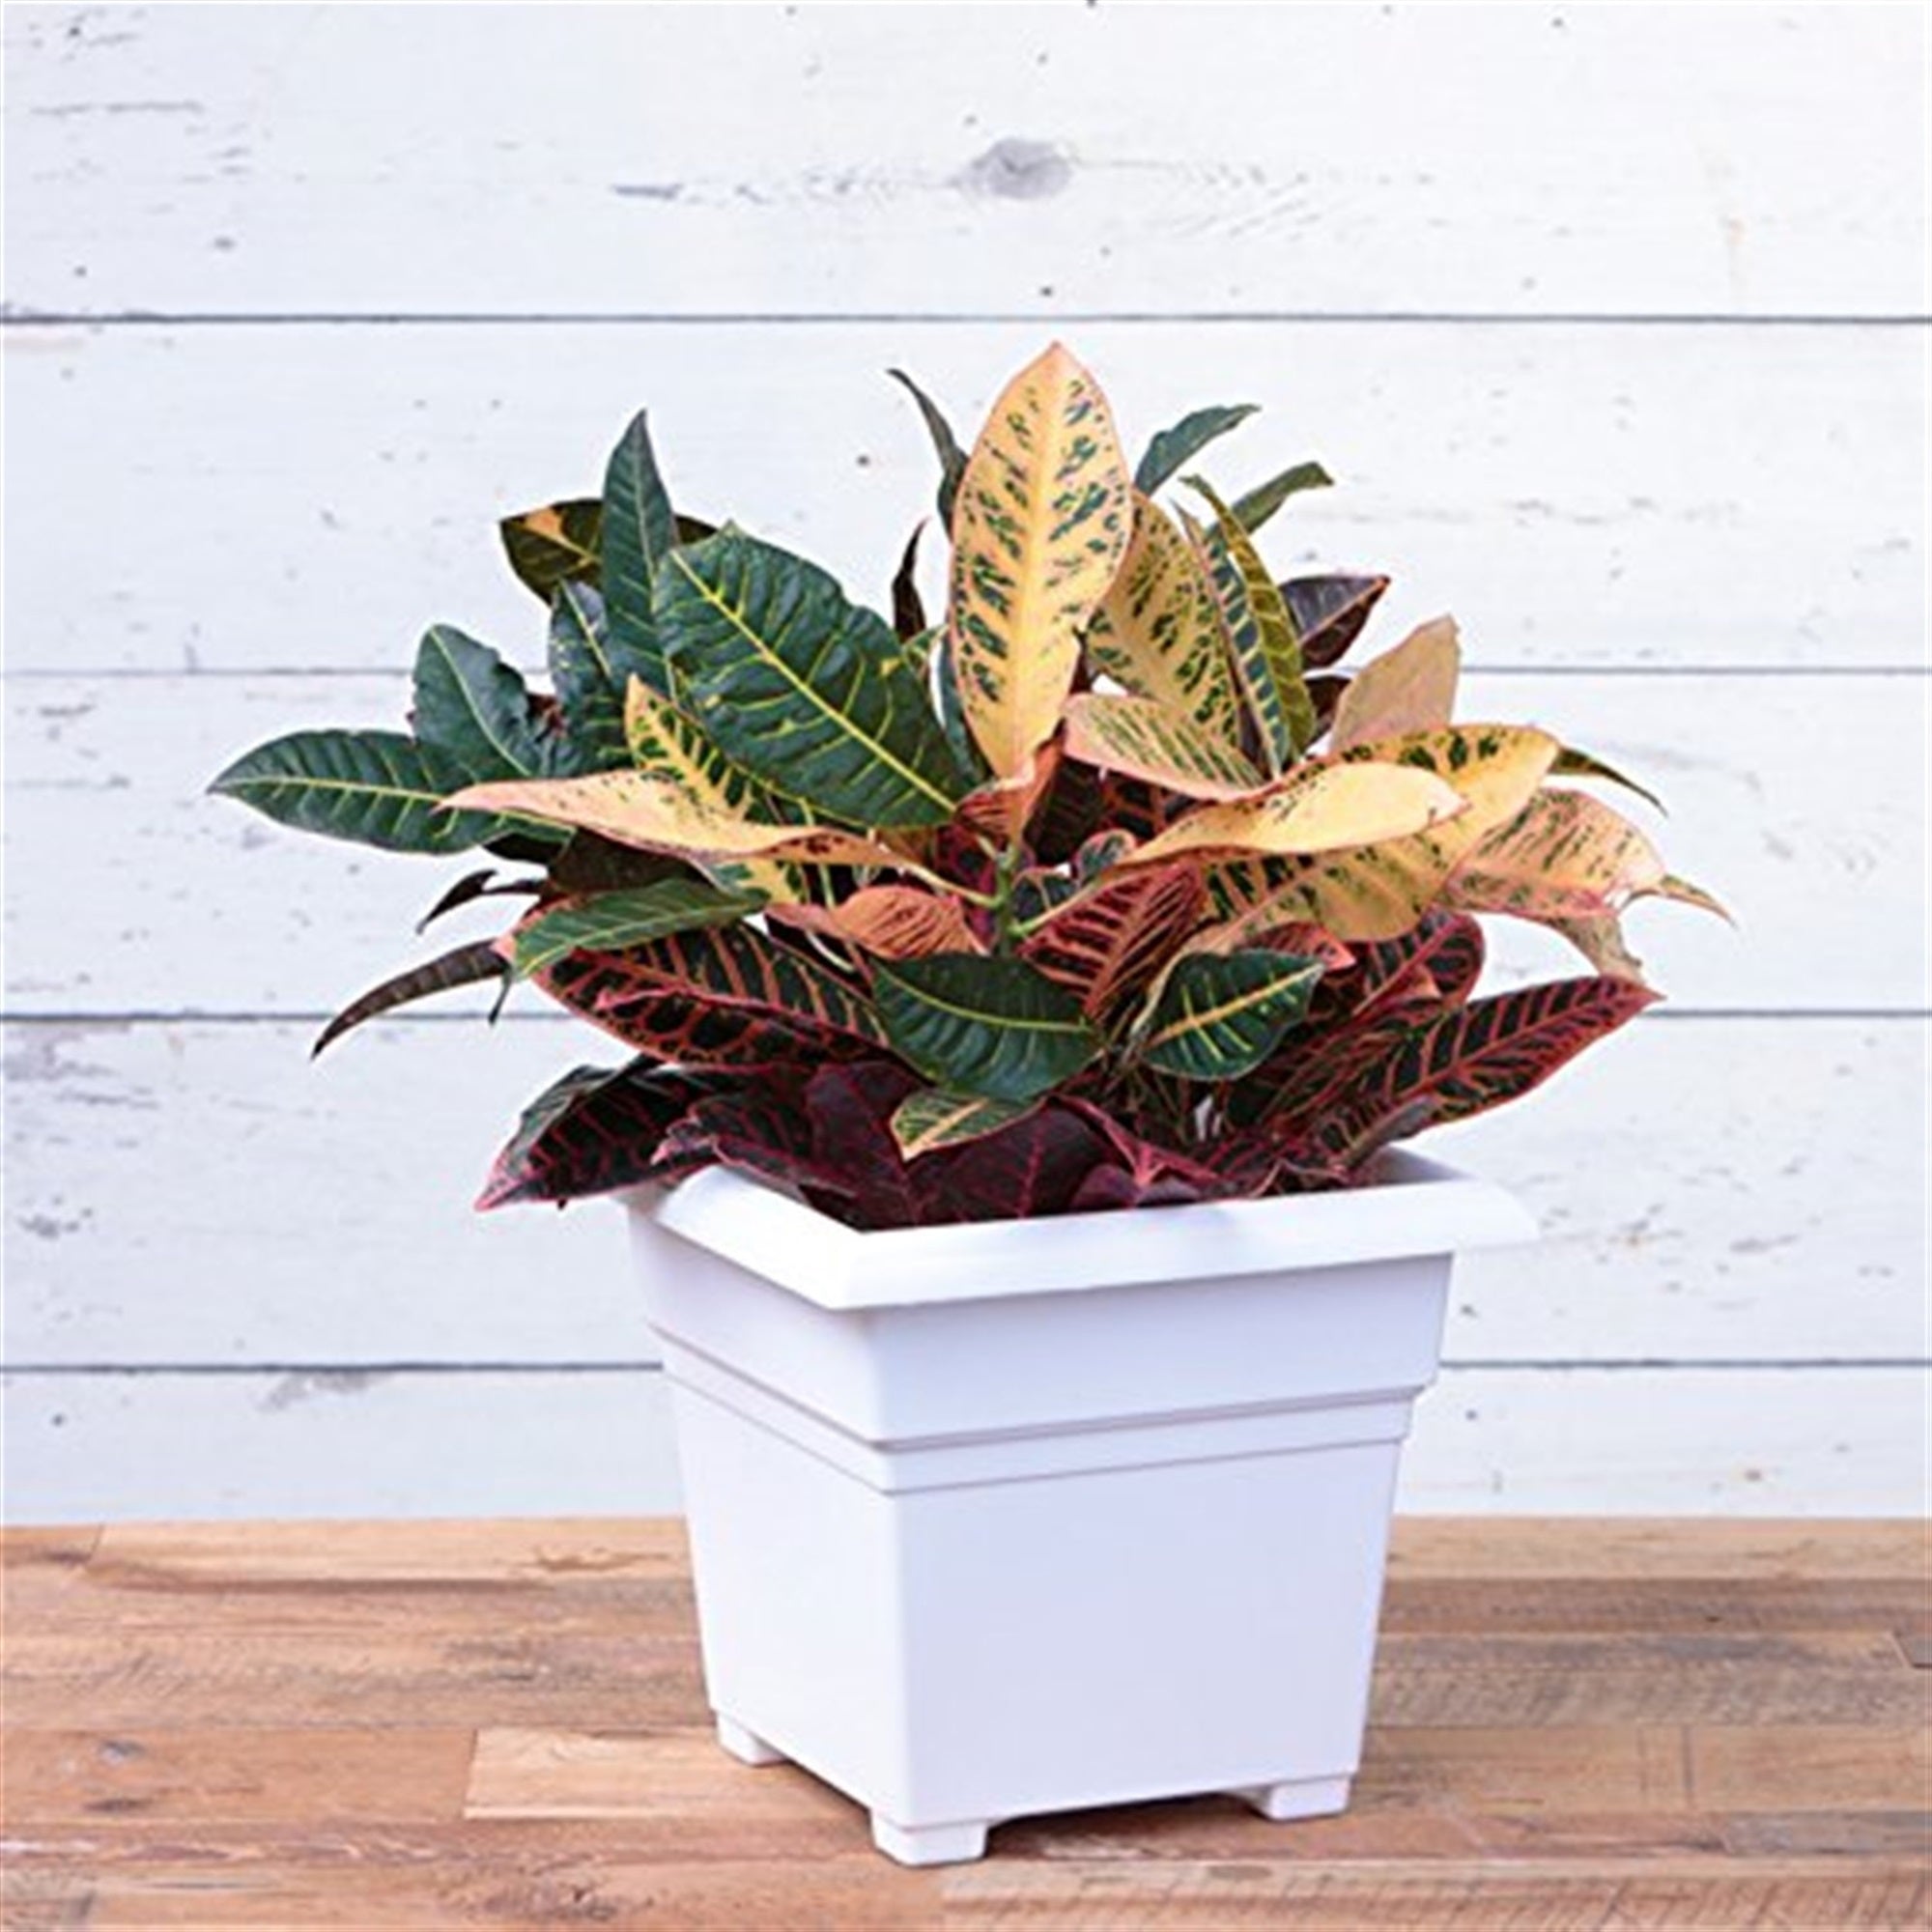 Novelty Countryside Square Tub Planter, White, 14 Inch